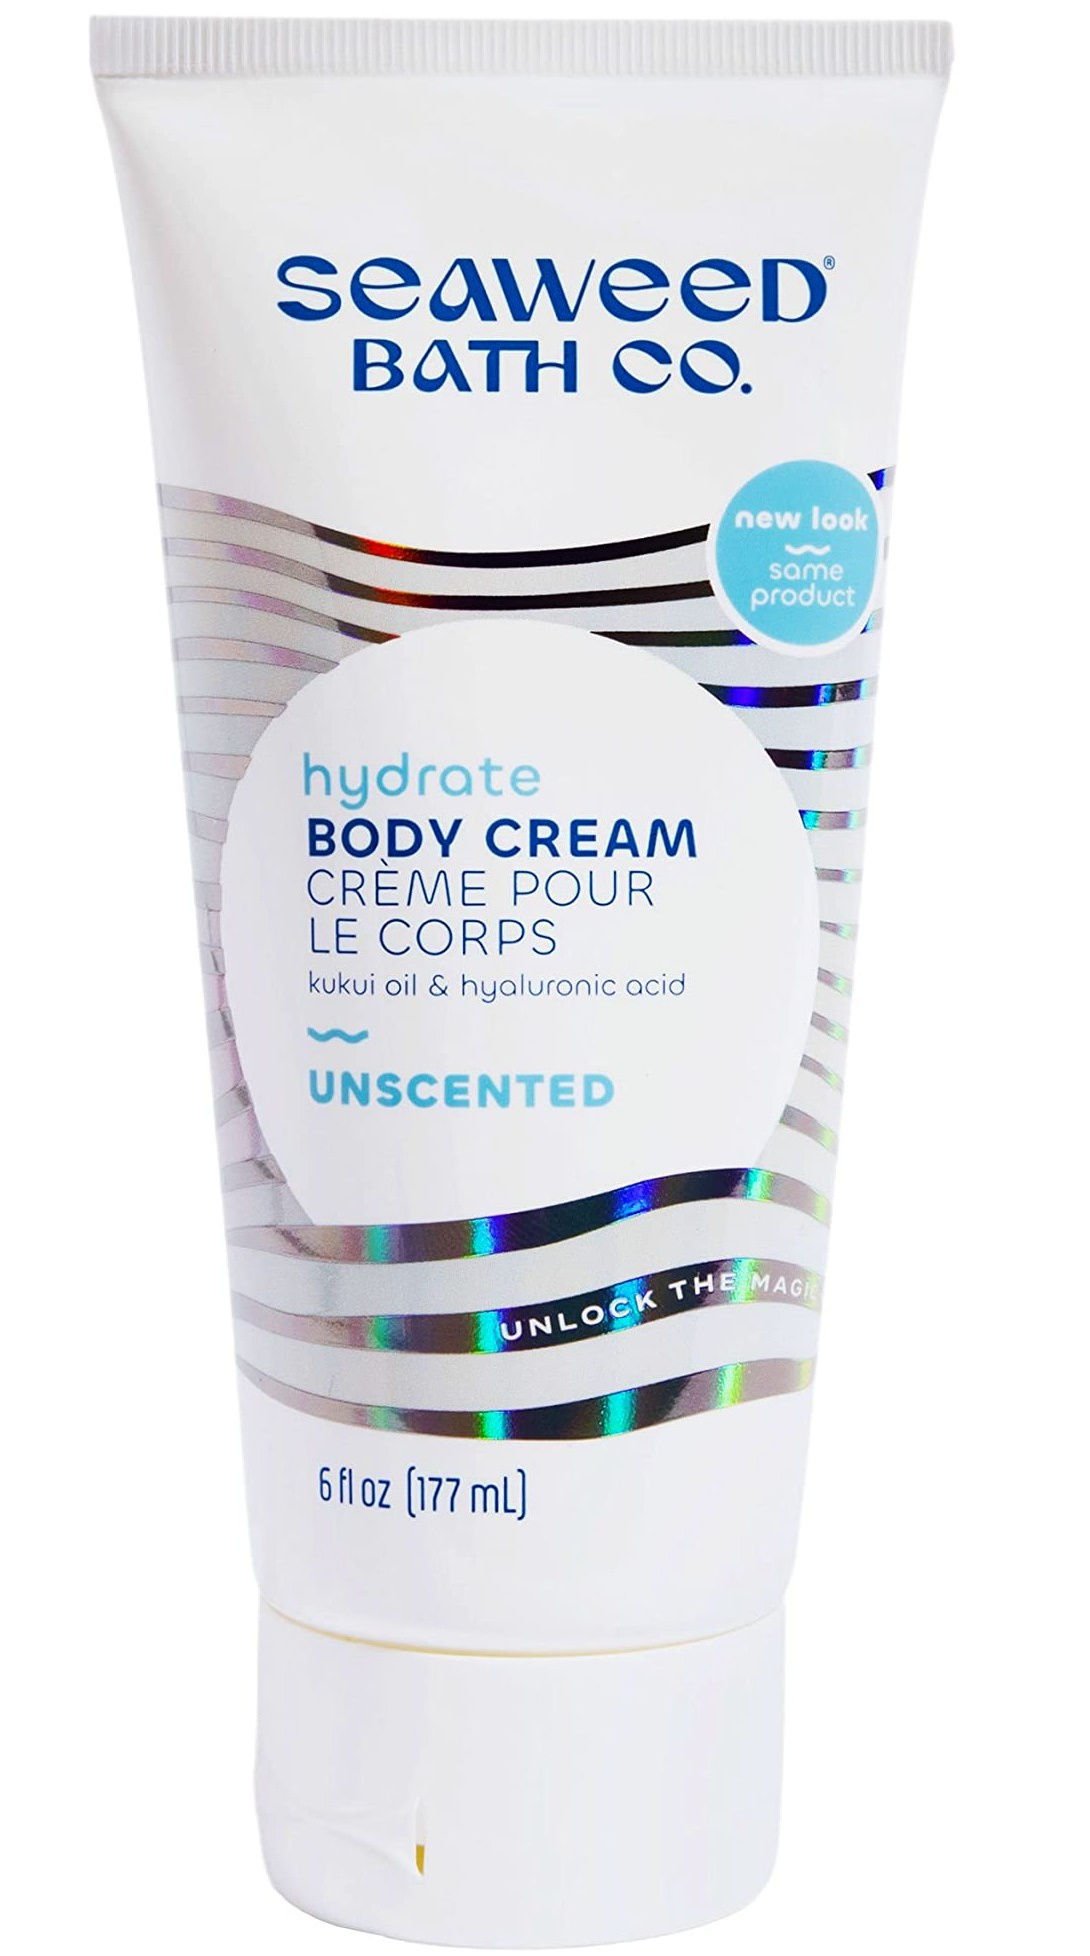 The Seaweed Bath Co. Hydrate Body Cream, Unscented